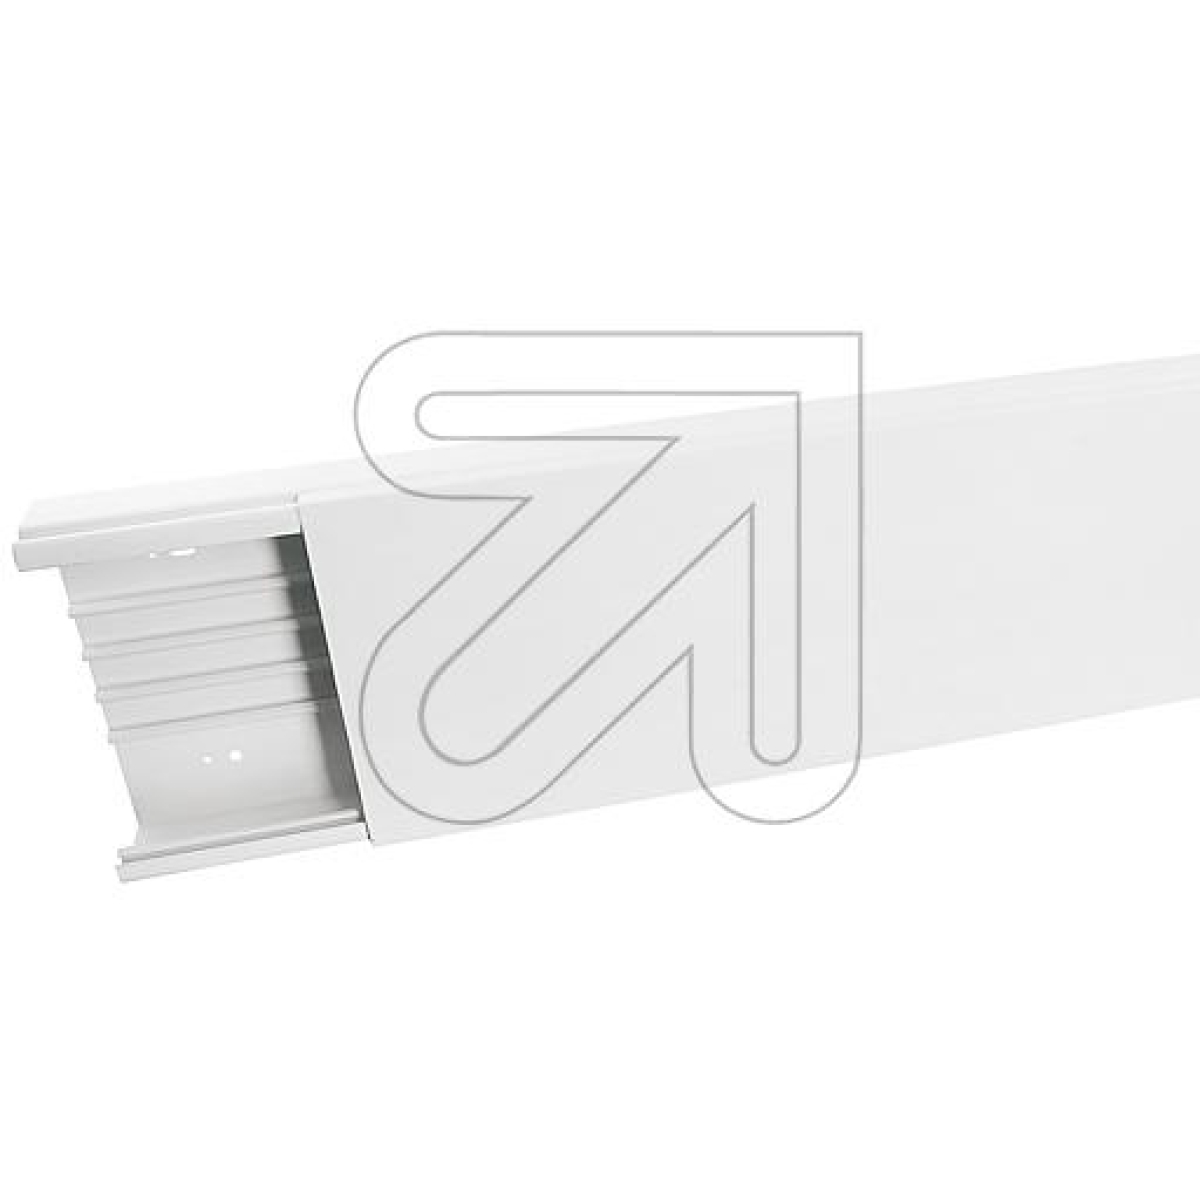 EGBDevice installation trunking 60x190 white-Price for 8 pcs.Article-No: 199220